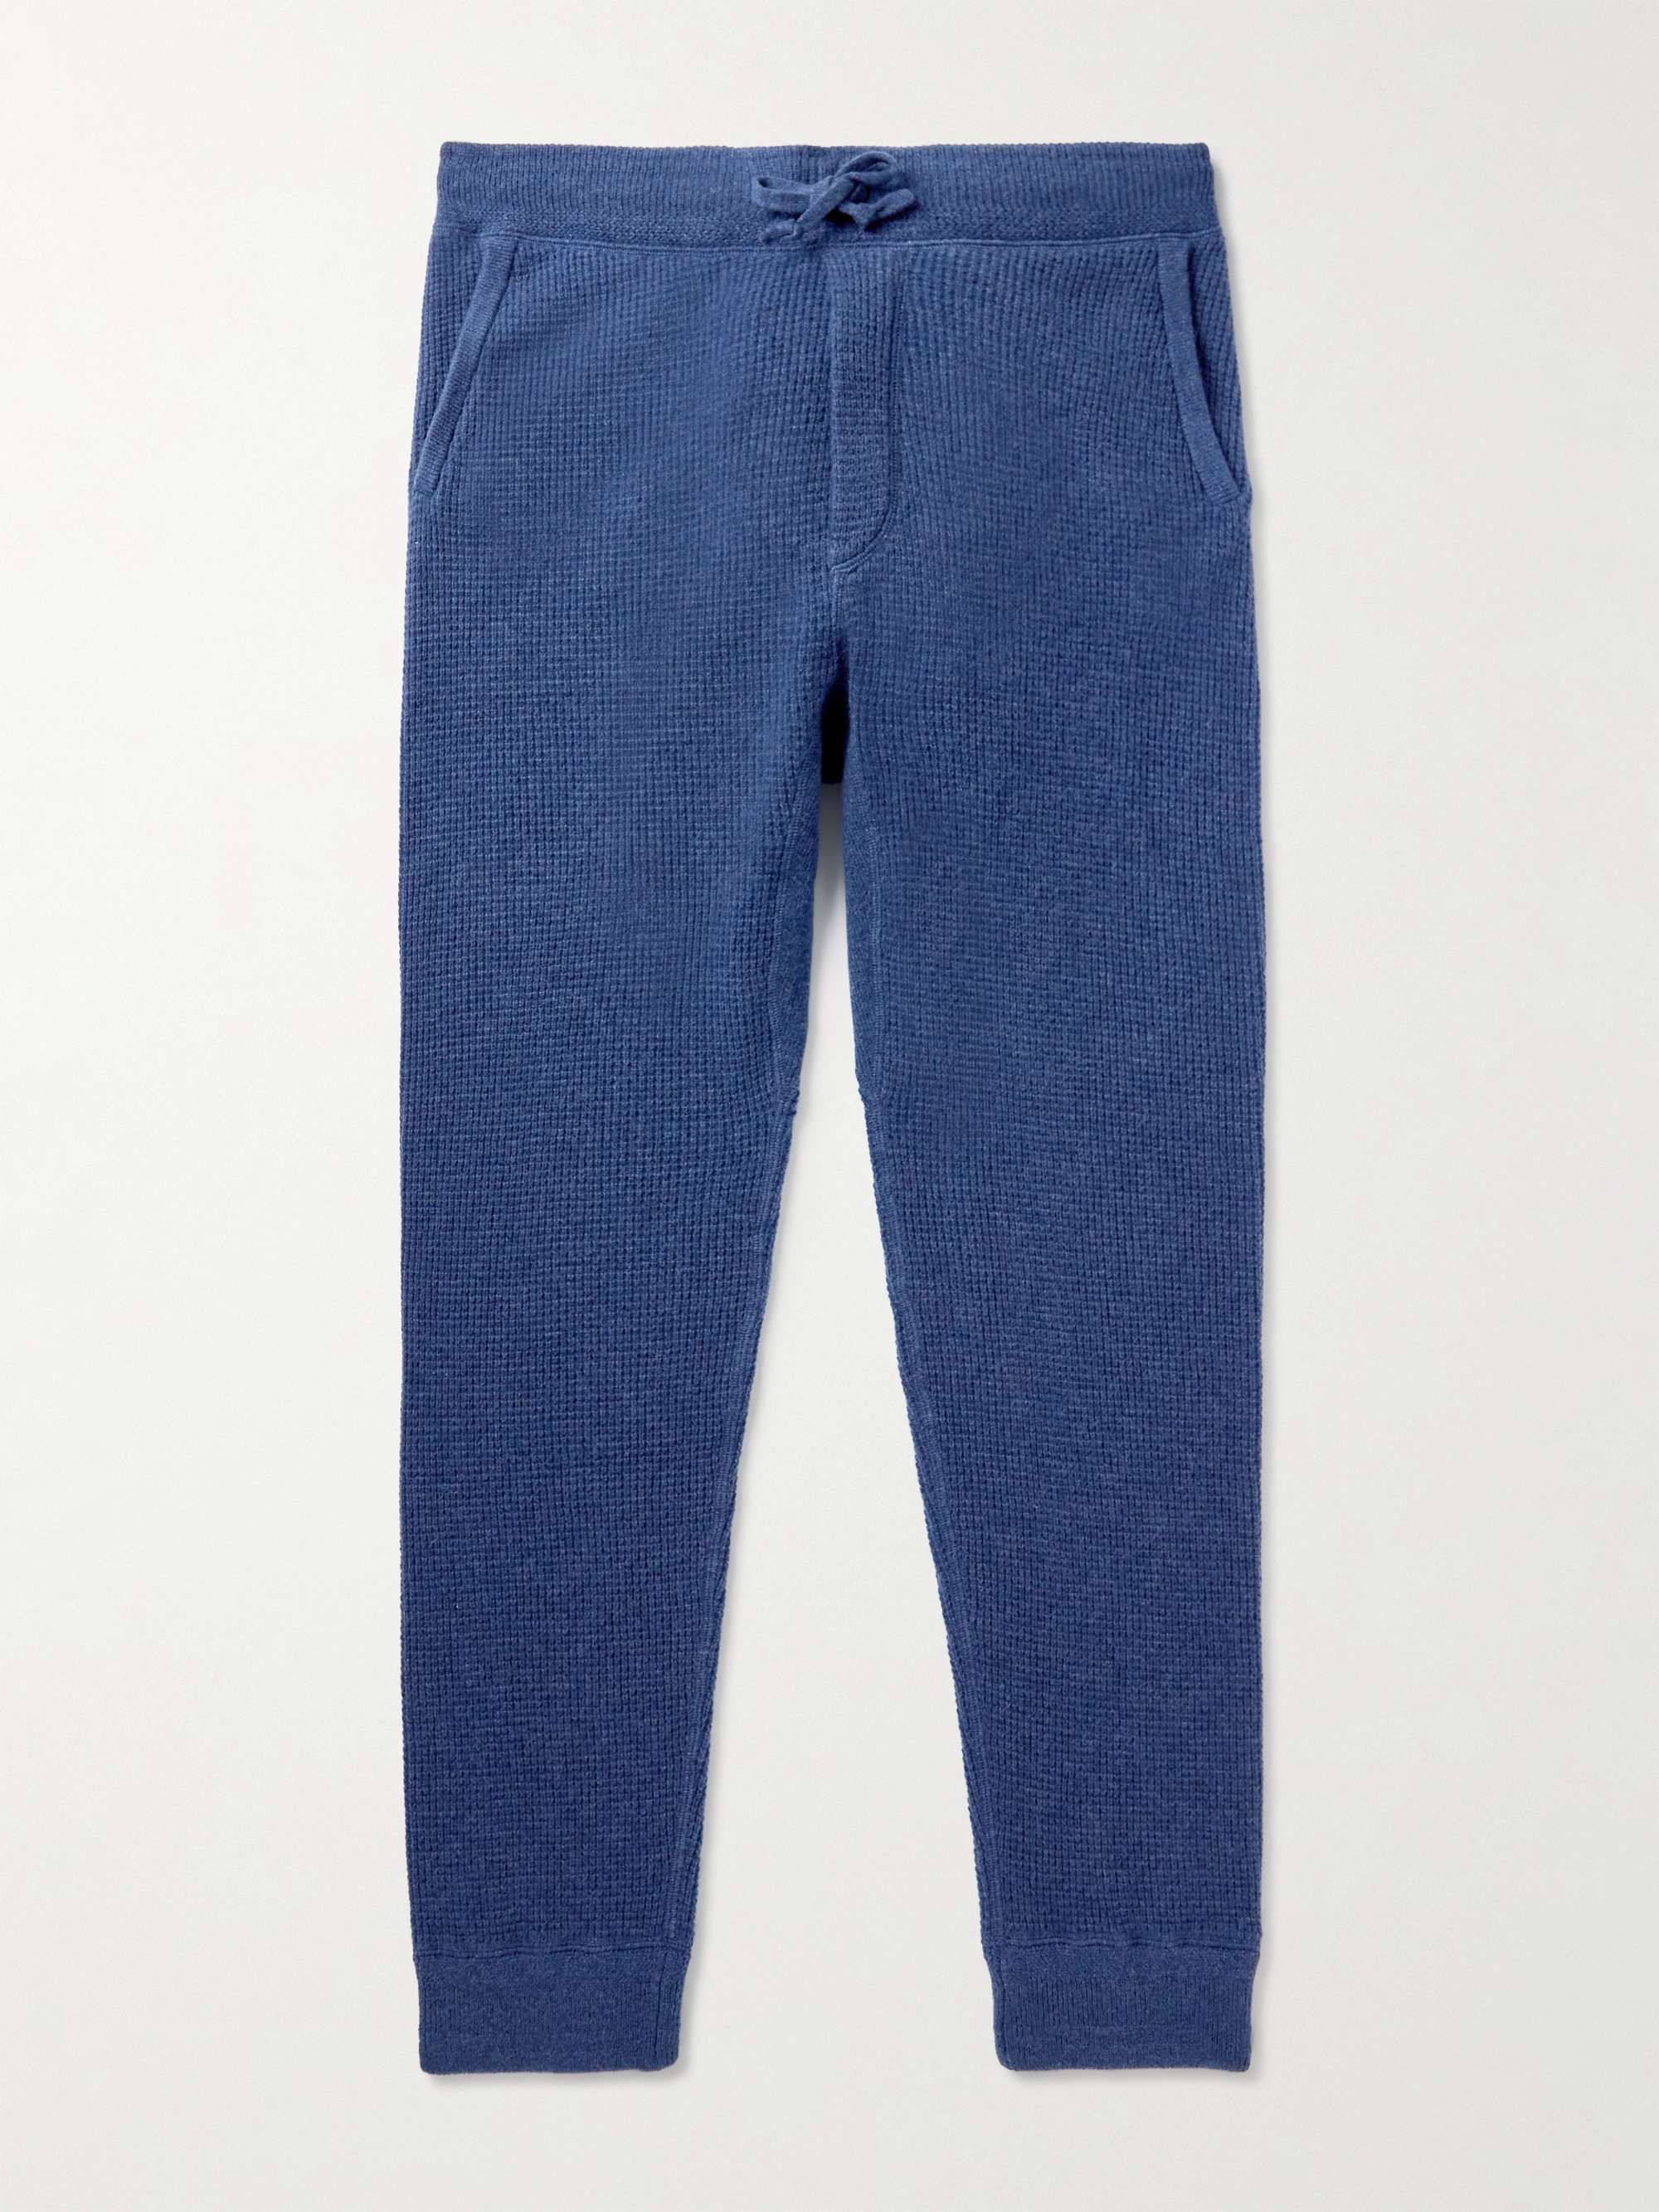 POLO RALPH LAUREN Tapered Waffle-Knit Cashmere Sweatpants,Navy